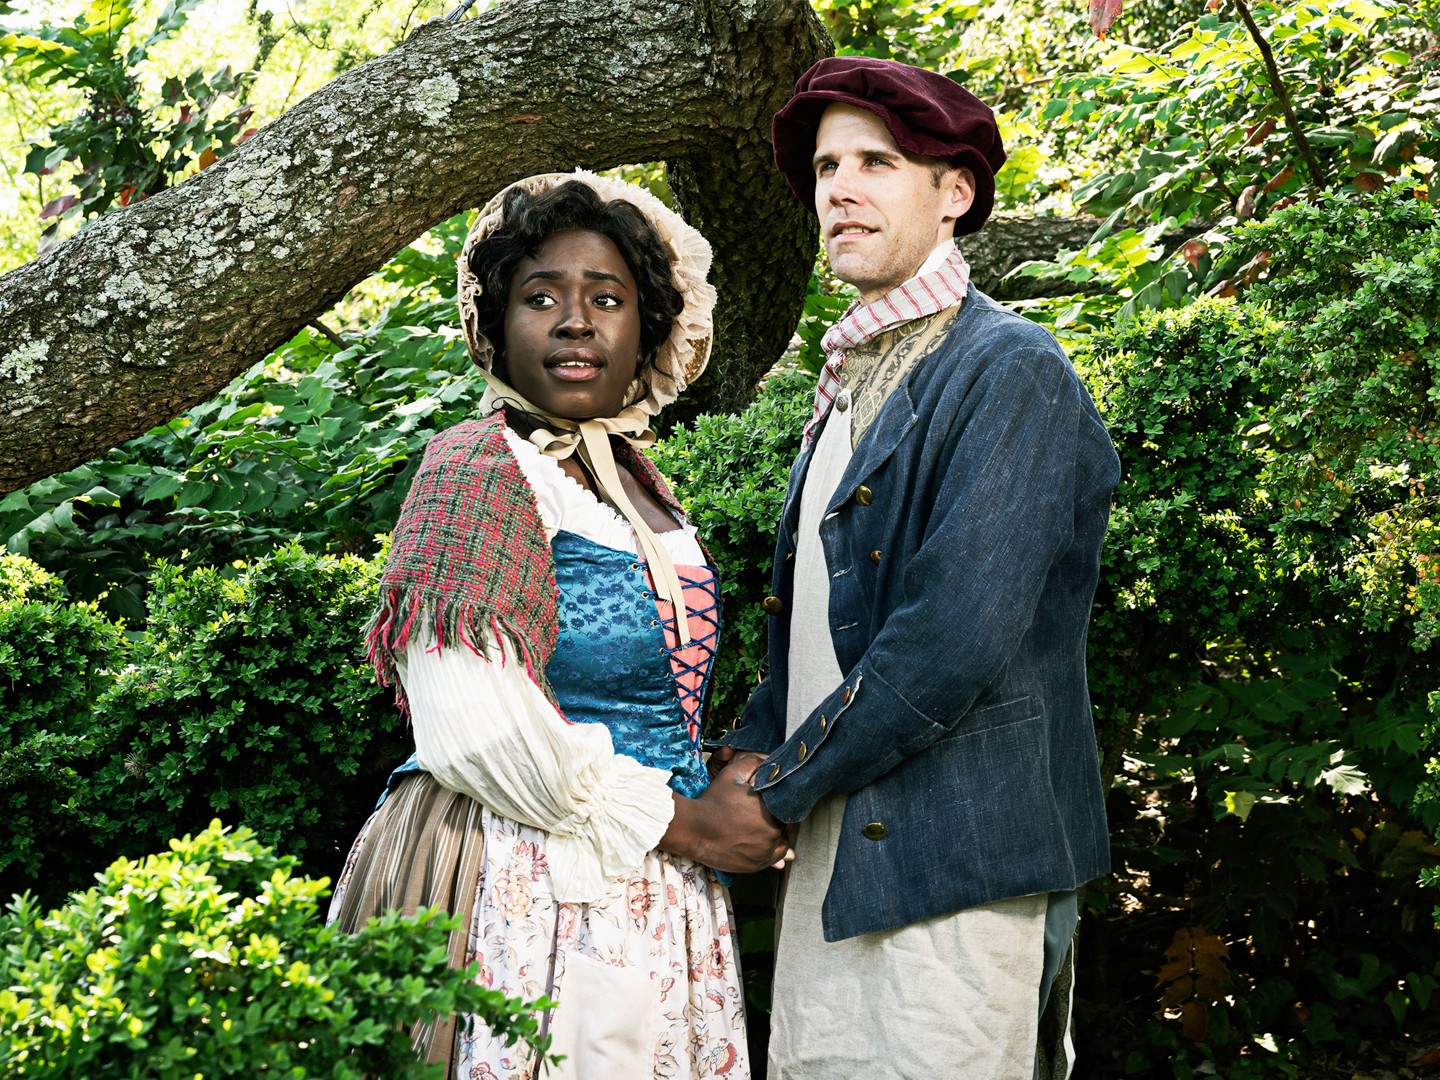 A black woman and white man hold hands in a forest. They are dressed like poor 18th-century fairy tale characters.